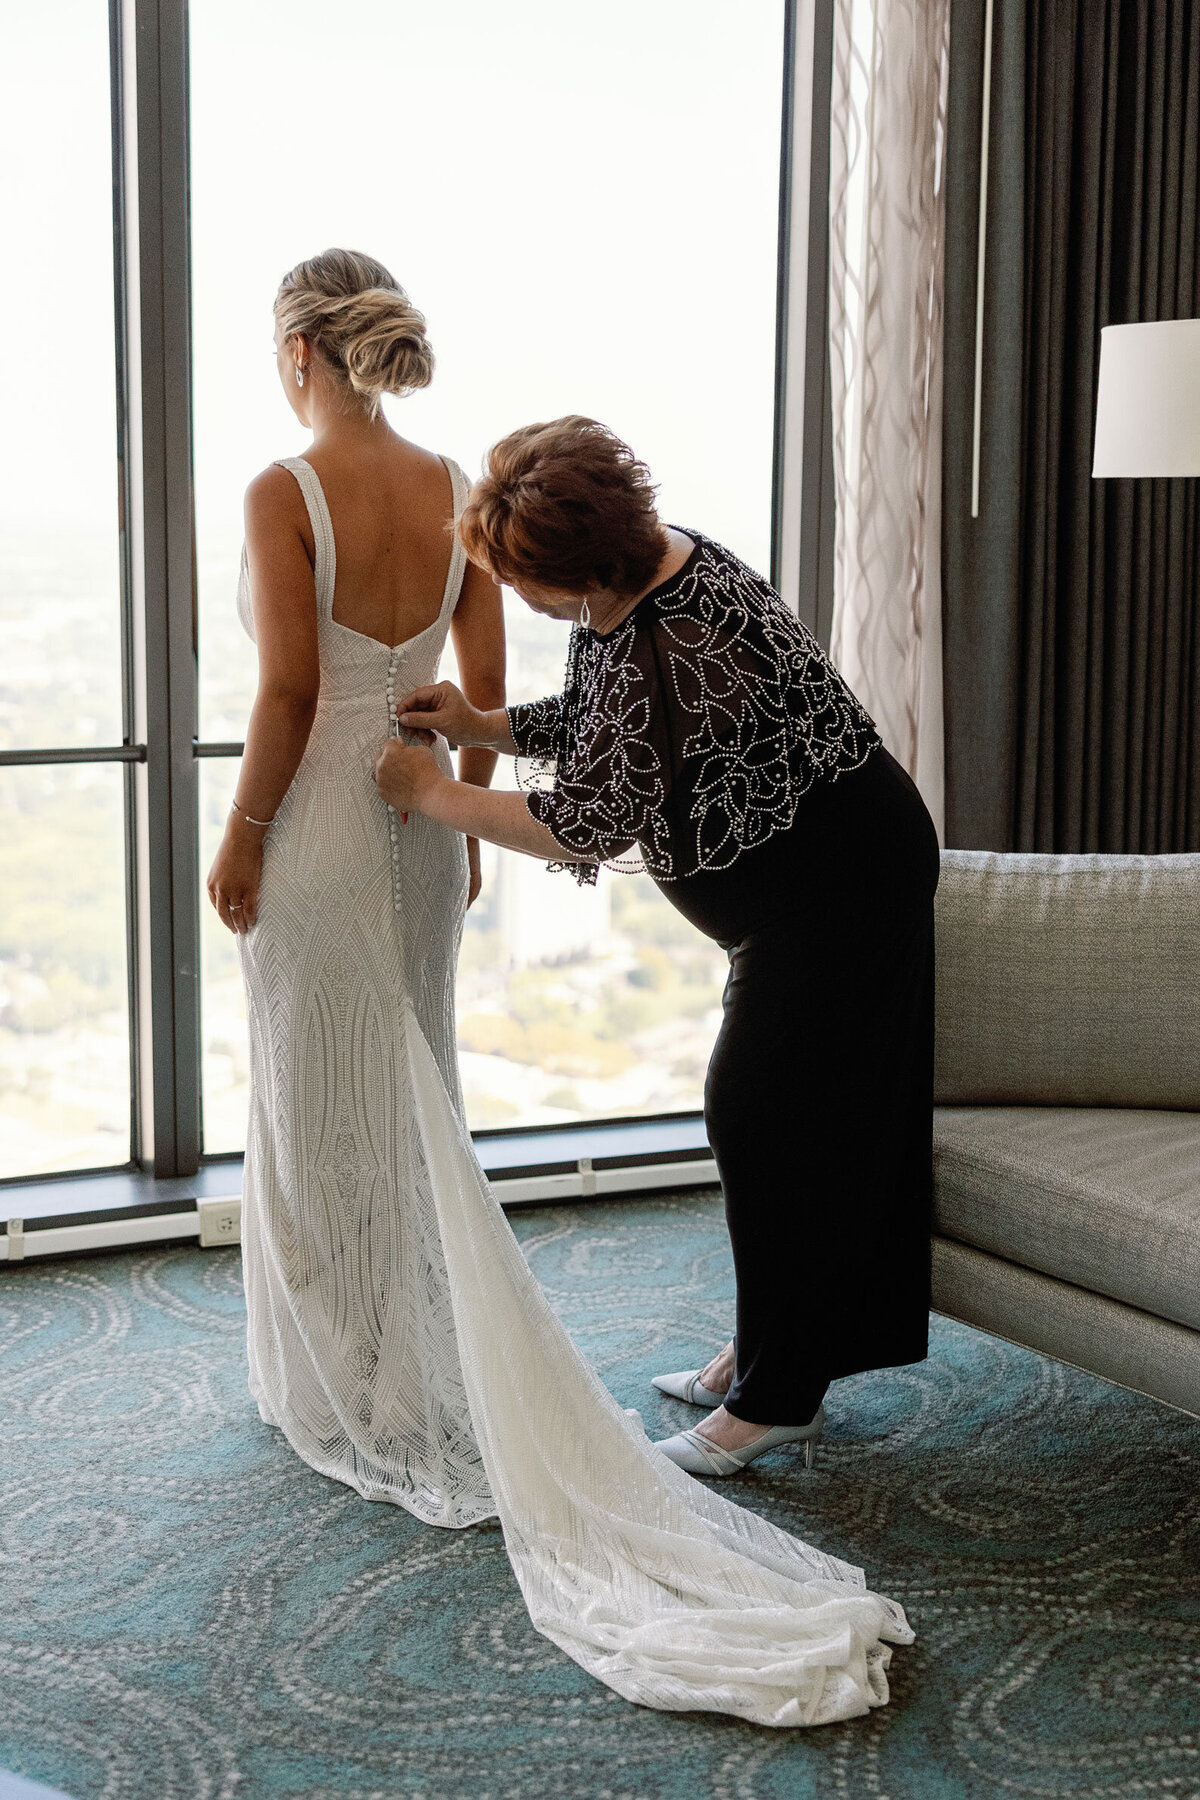 Brides mom helping with the dress